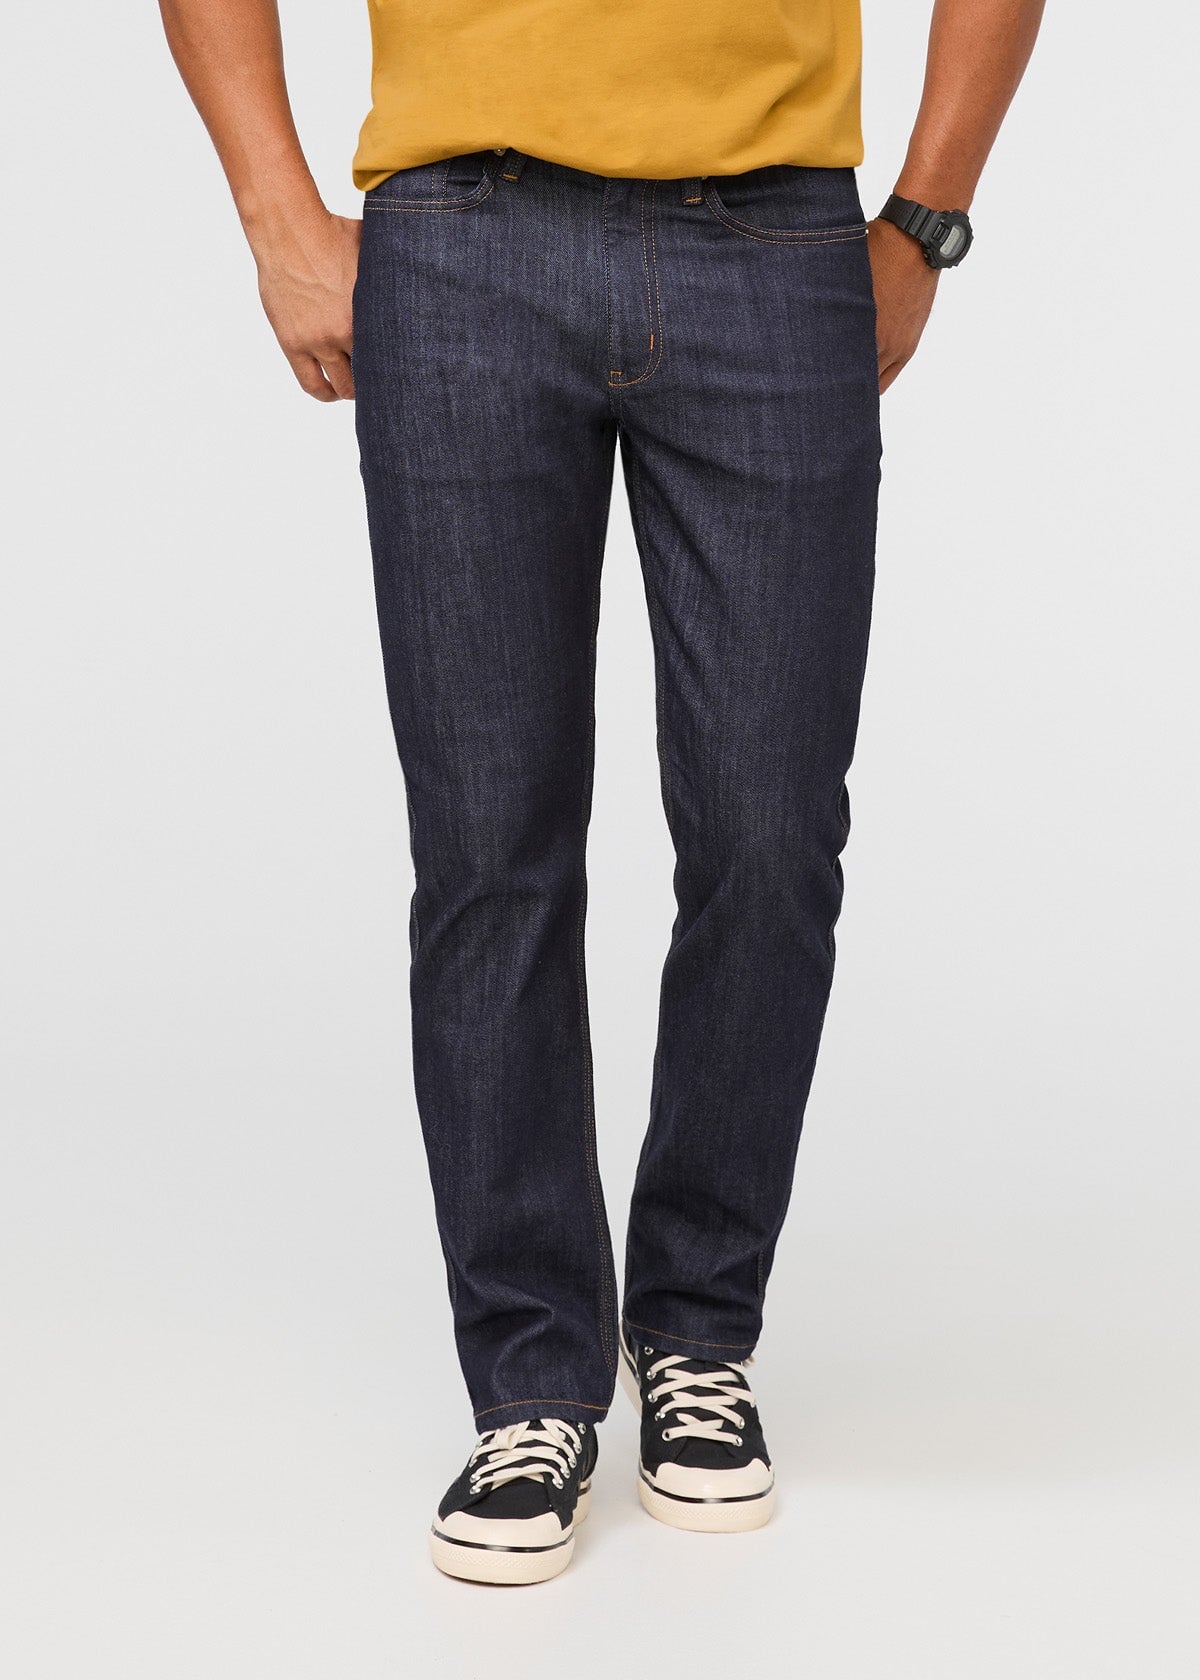 DUER Men's No Sweat Relaxed Taper Pant (Past Season)